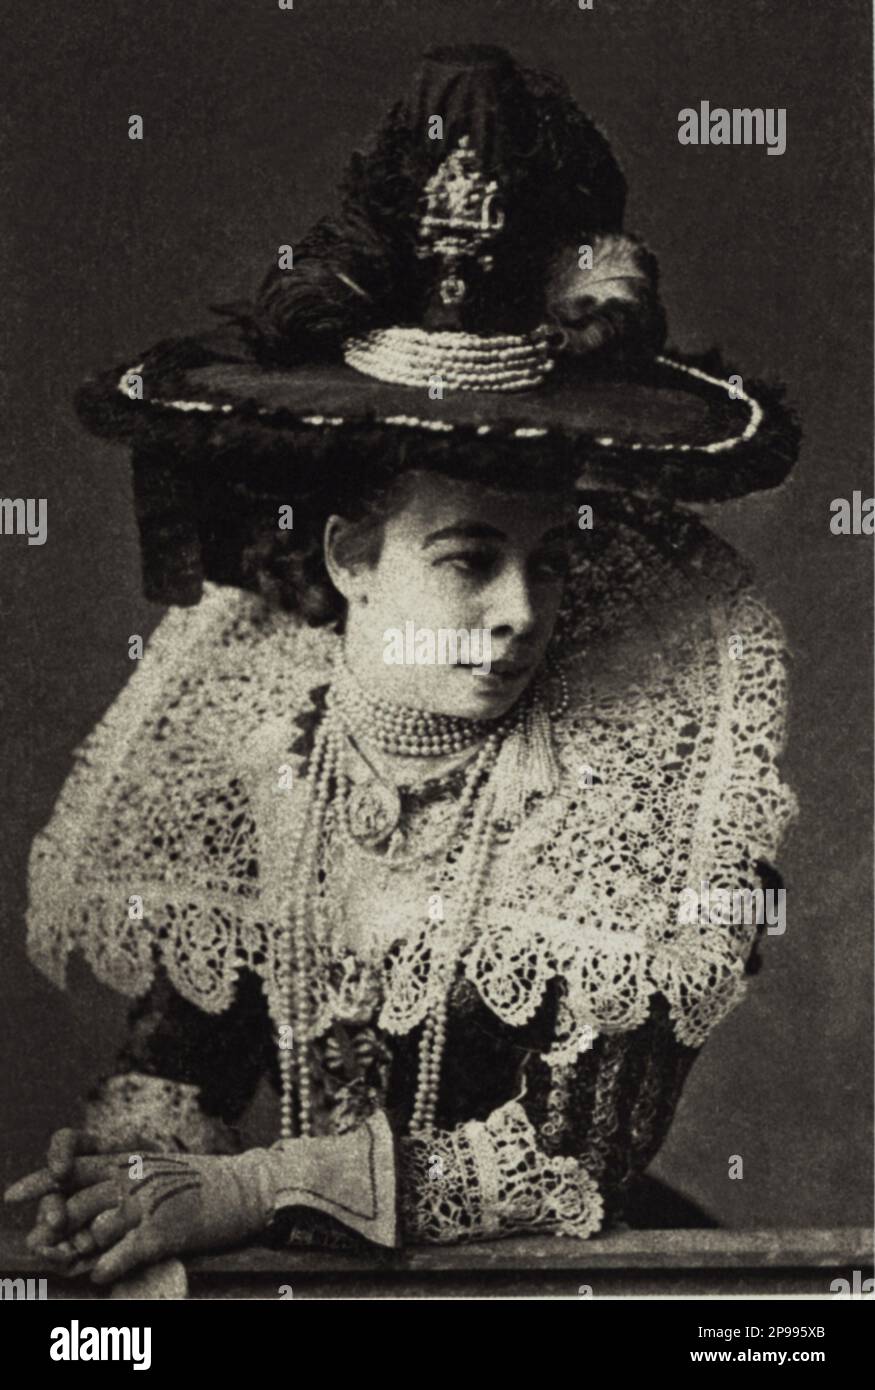 1877 , Wien , Austria : Princess PAULINE Clémentine de METTERNICH Winneburg zu Beilstein, née Countess Pauline Clémentine Marie Walburga Sandor de Szlavnicza, ( Vienna 1836  -  1921 ) was a famous Viennese and Parisian socialite of great charm and elegance. She was an important promoter of the work of the German composer Richard Wagner and the Czech composer Bedrich Smetana . In 1856 she married Prince Richard von Metternich, a son of chancellor Prince Klemens Wenzel von Metternich so they were a husband and a wife and an uncle and a niece simultaneously. Portrayed by impressionist painter Edg Stock Photo